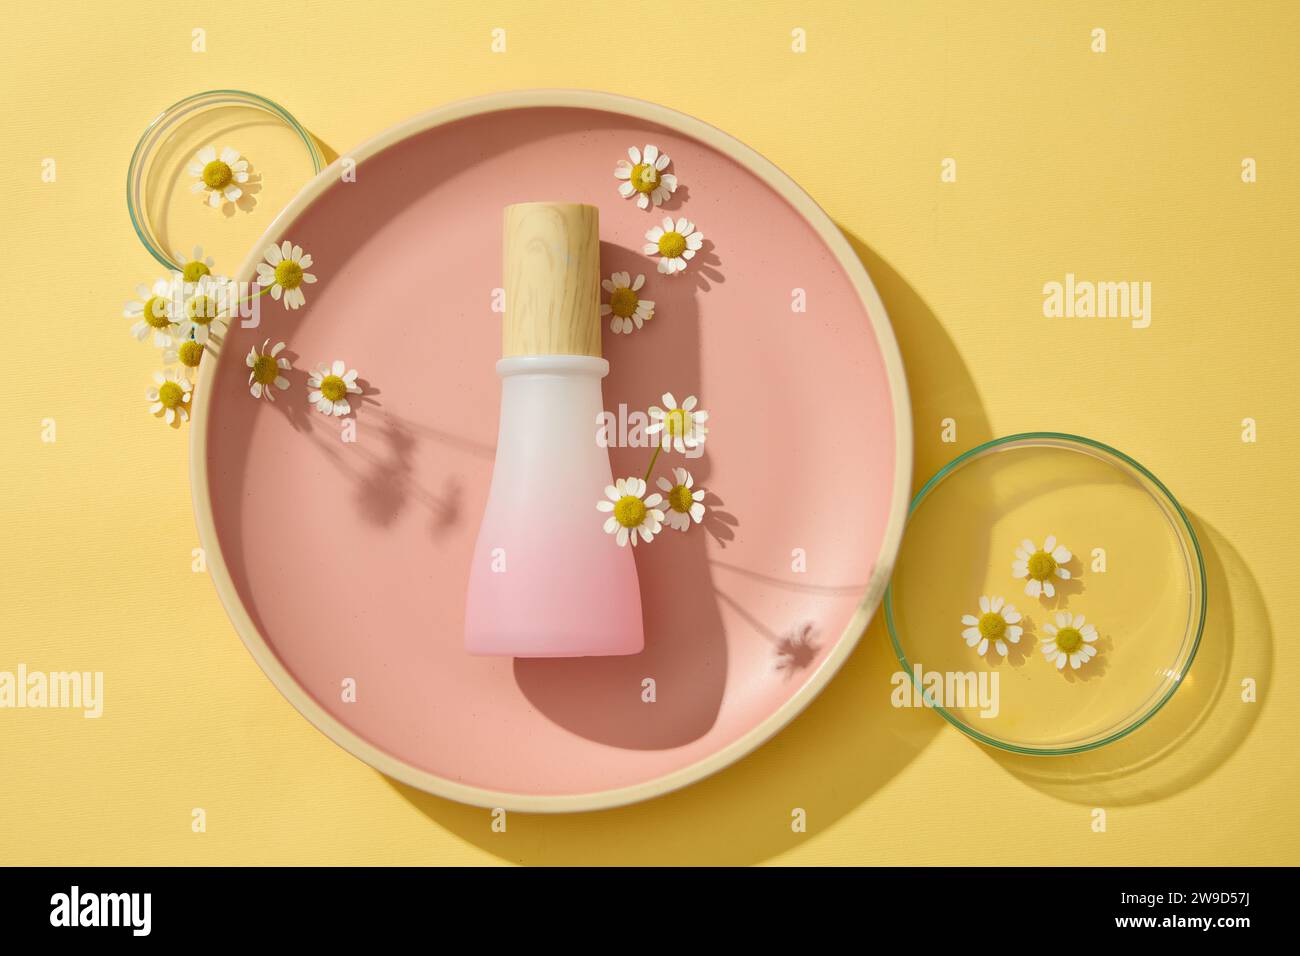 A pink glass bottle unbranded displayed on a round dishes with fresh chamomilla flowers and petri dishes on a yellow background. Herbs are widely used Stock Photo